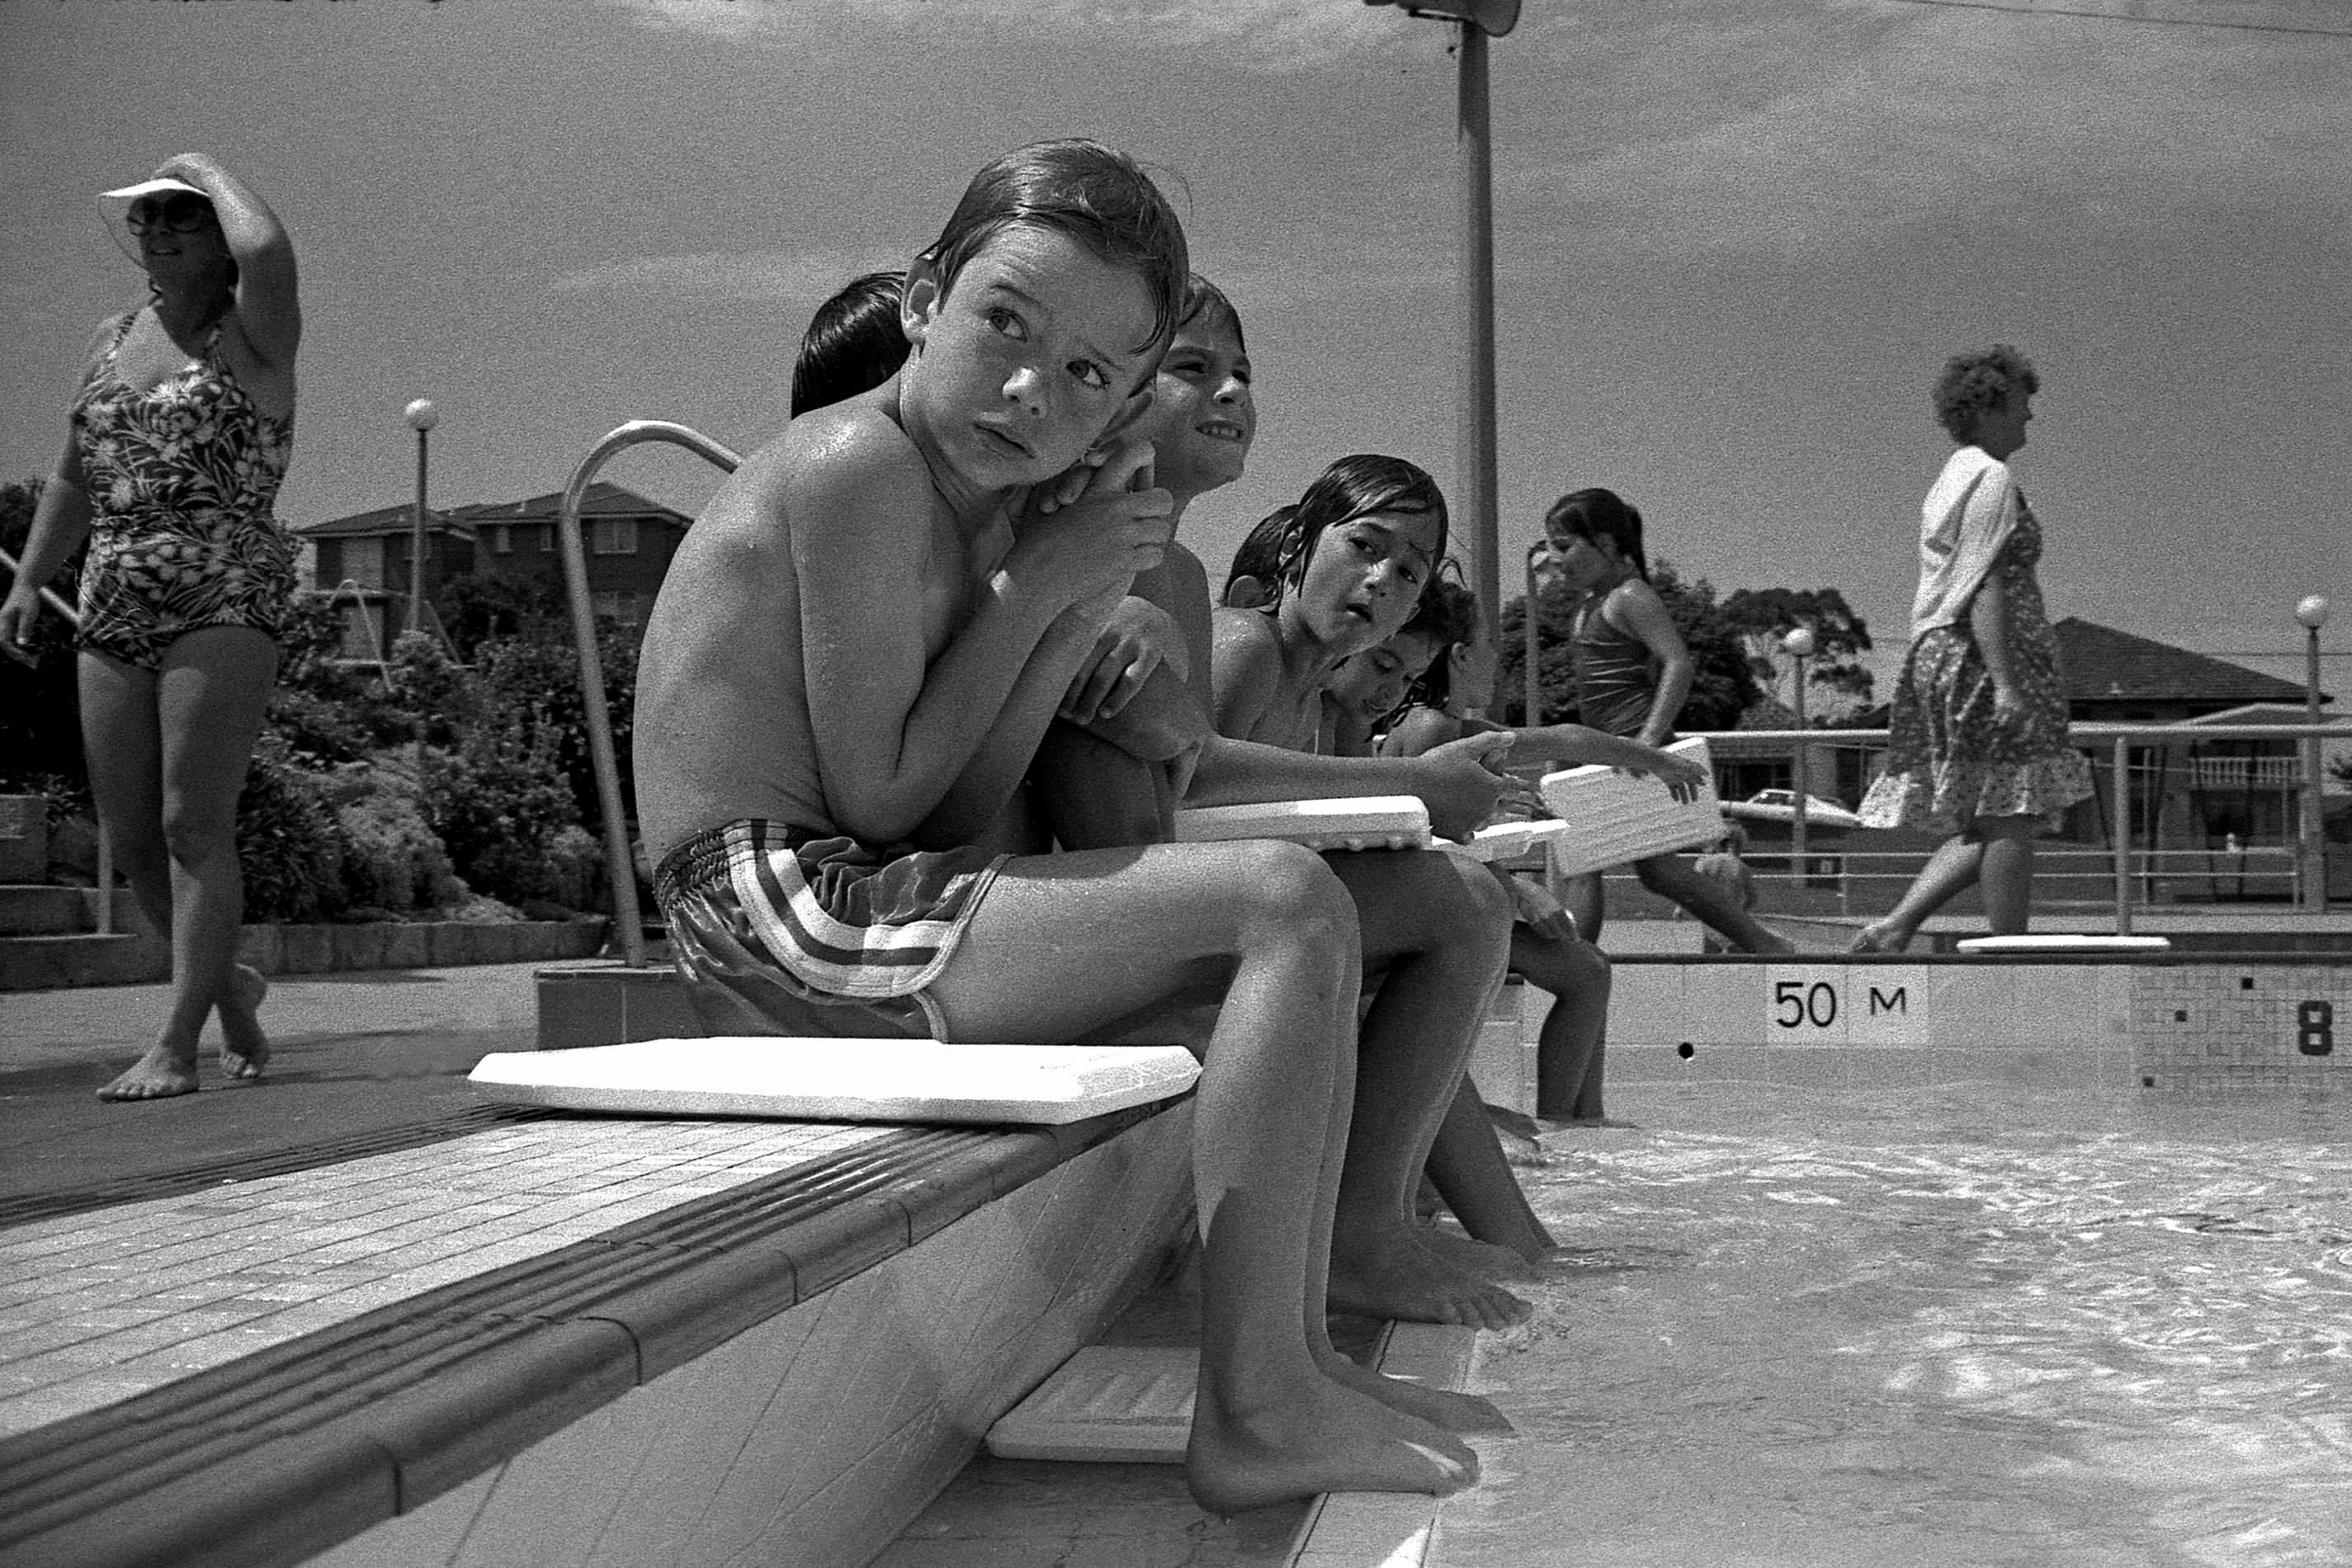 A black and white photograph of children sitting on the edge of a public swimming pool.